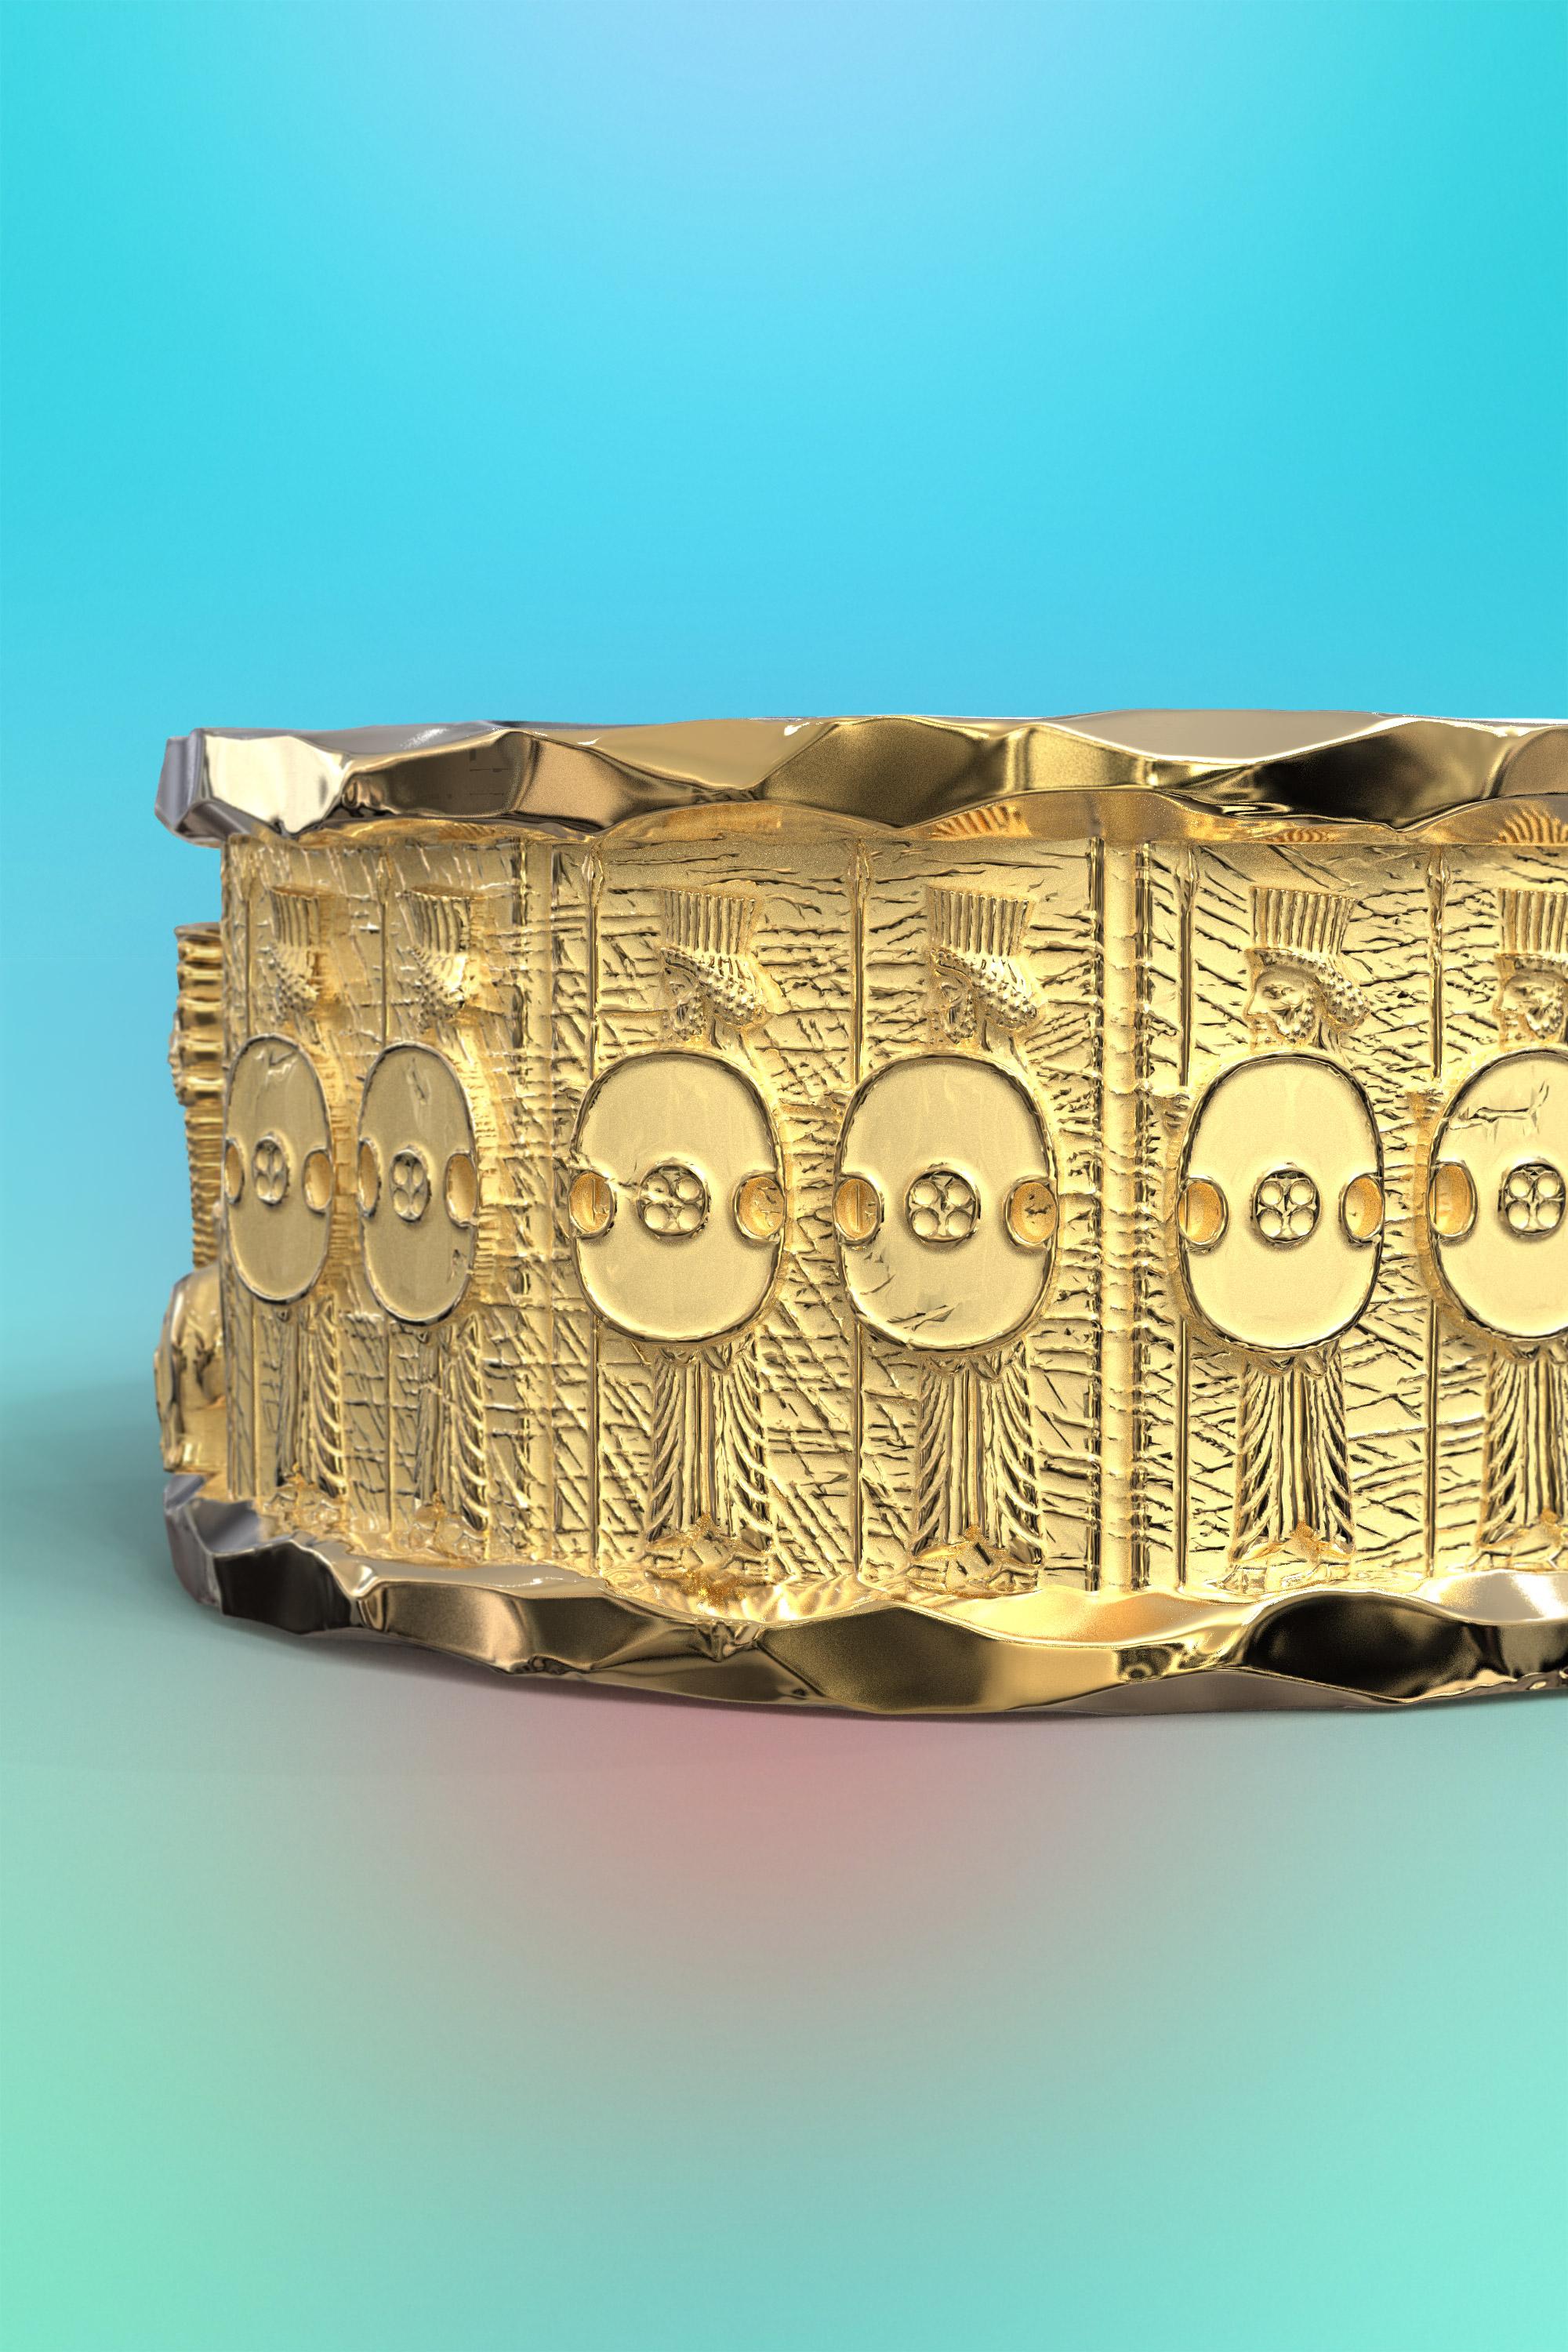 For Sale:  Italian 14k Gold Ring with Temple of Persepolis Bas-Reliefs, Persian Style Ring  3